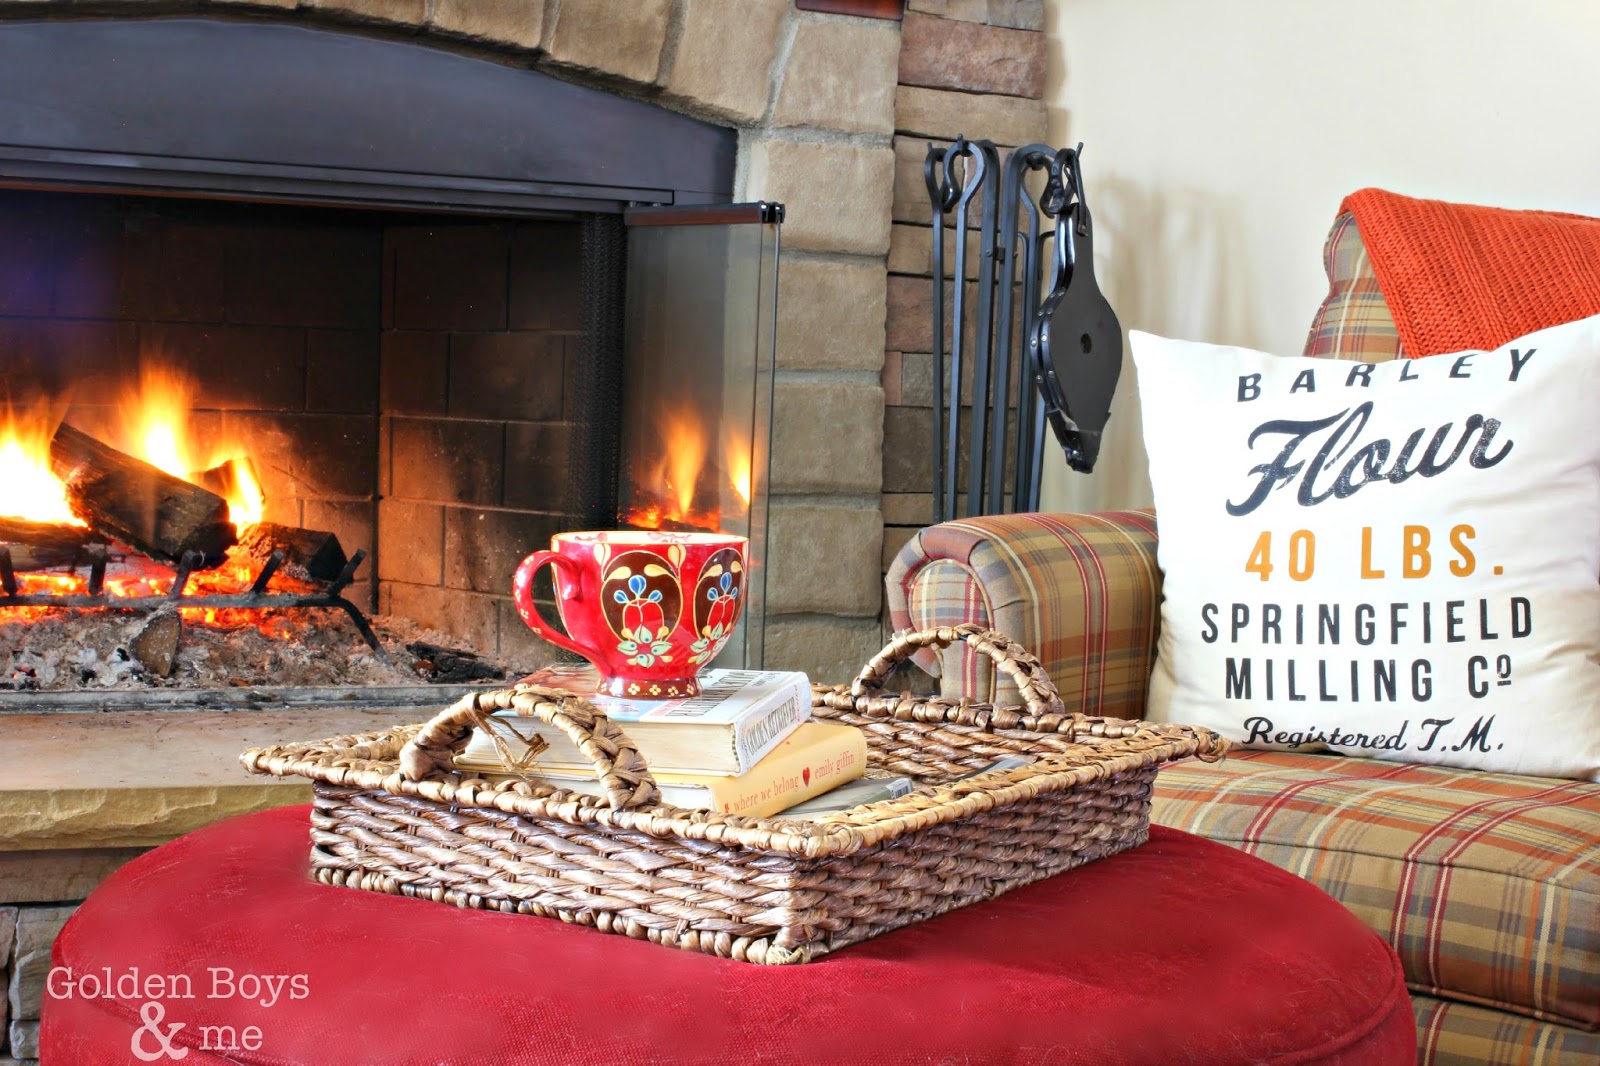 Basket on ottoman in front of fireplace-www.goldenboysandme.com